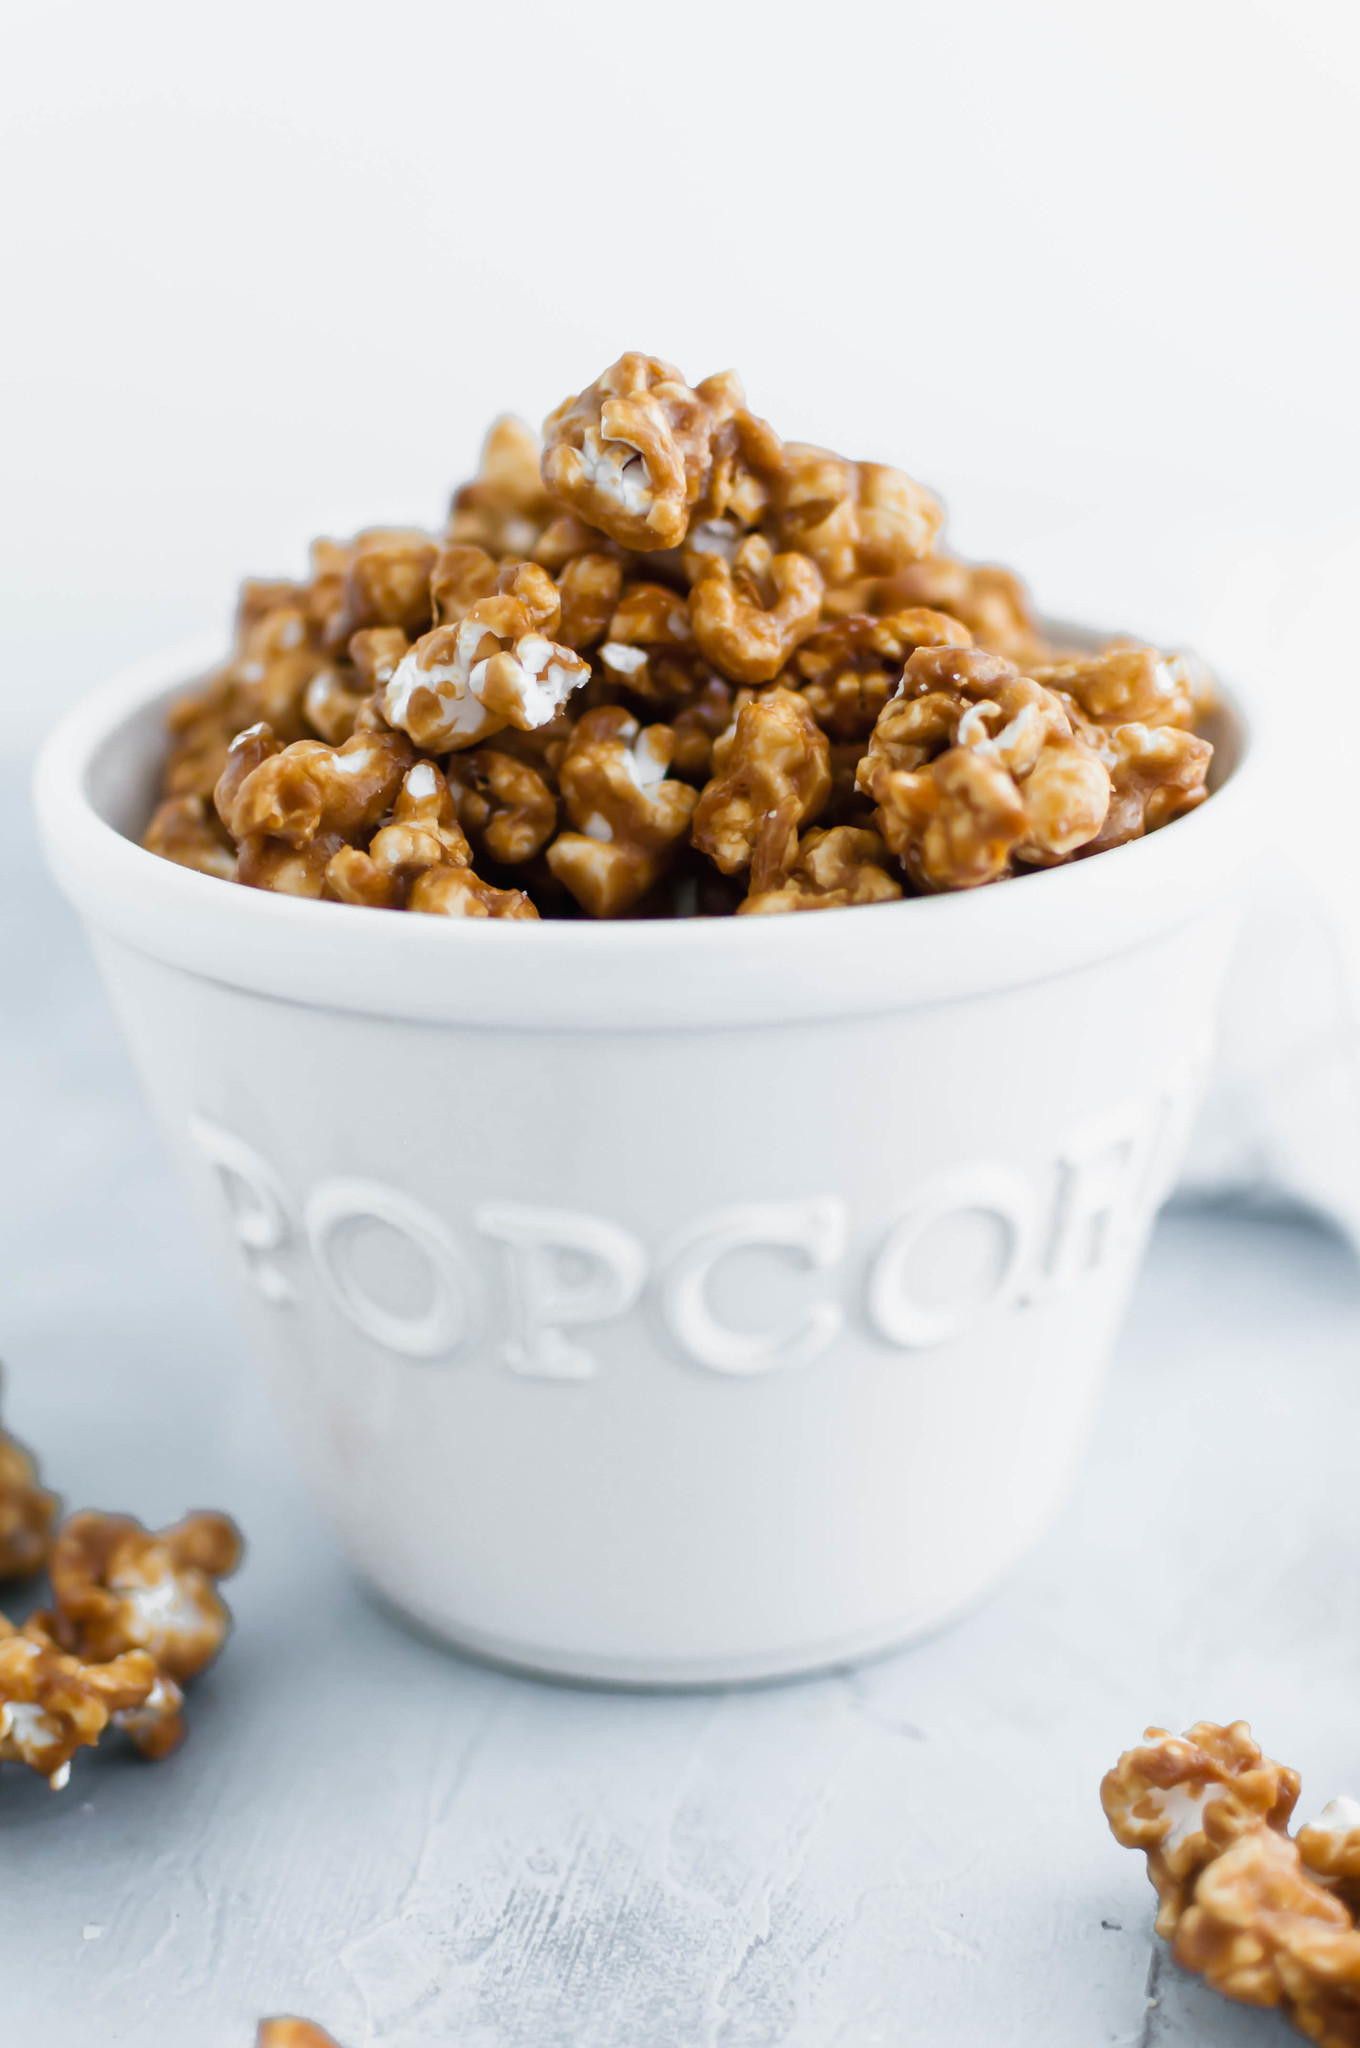 Salted caramel popcorn is the perfect addition to a party or movie night. It features a simple homemade caramel sauce, freshly popped popcorn and a hearty sprinkle of coarse salt.